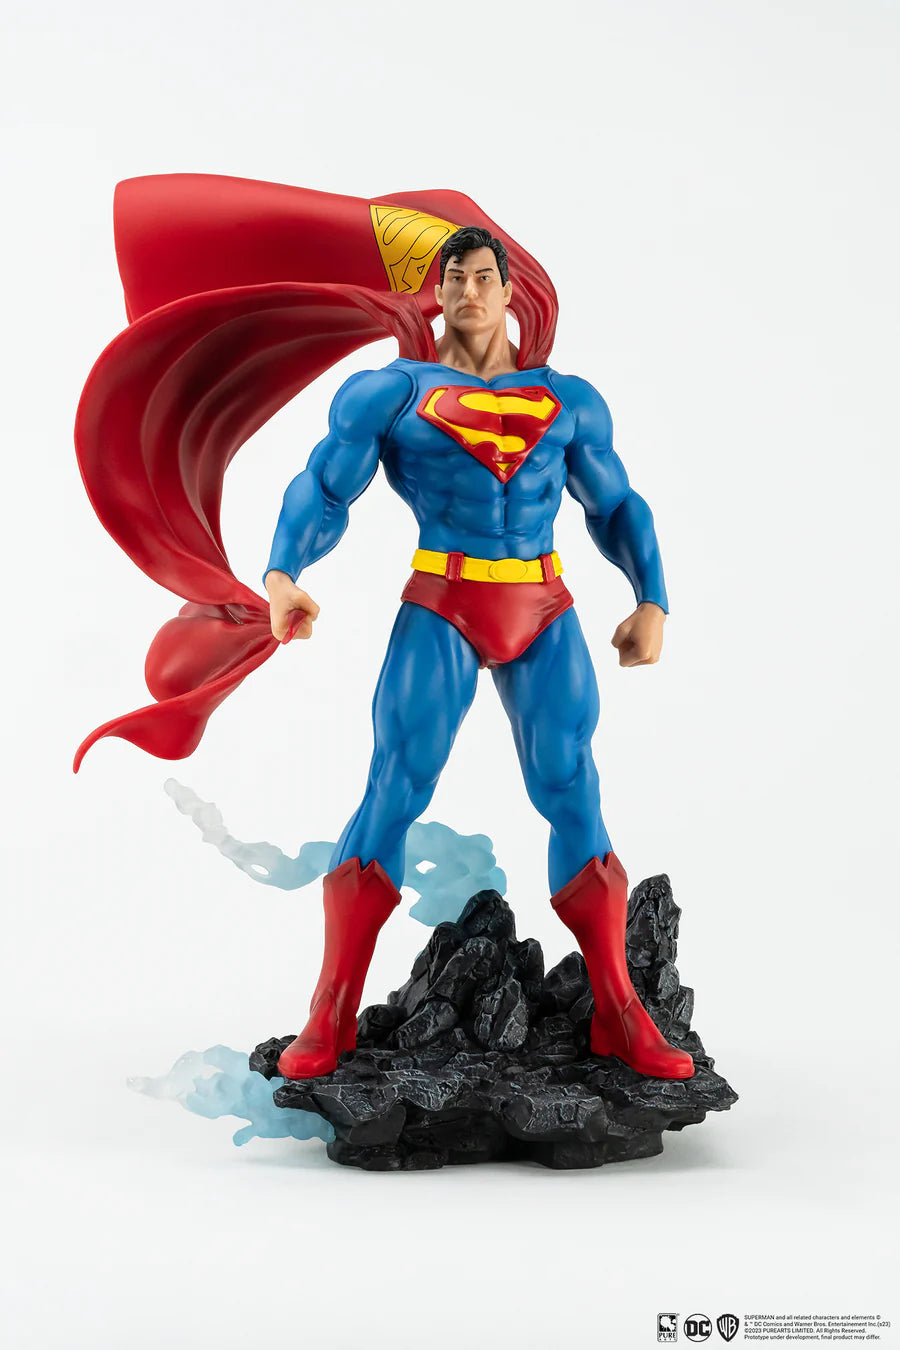 DC Heroes Superman Classic Version 1:8 Scale Statue Previews Exclusive